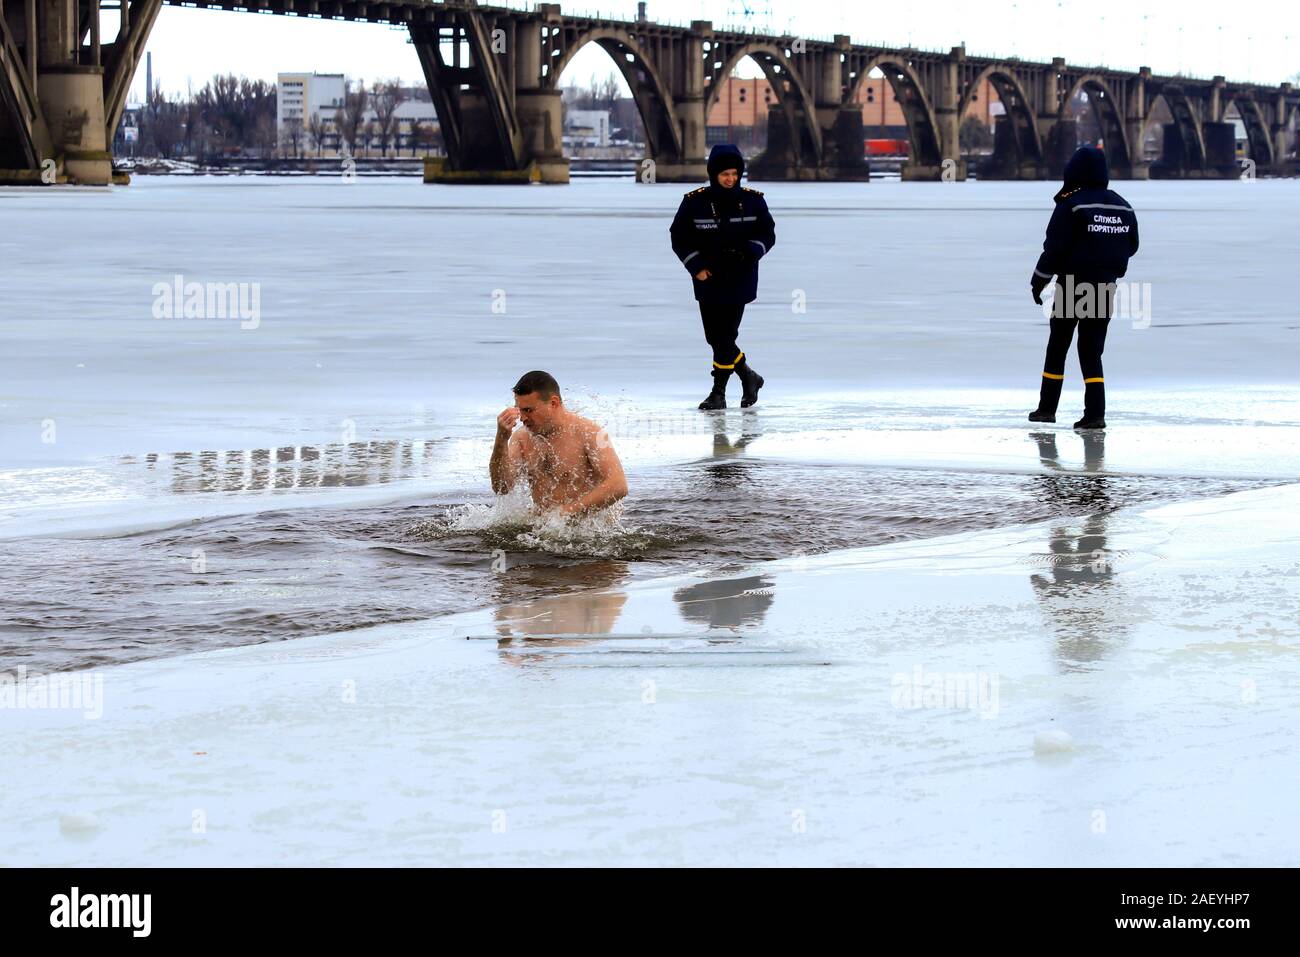 Dnepropetrovsk, Ukraine, 019.01.2019 Winter sports, swimming, hardening. People bathe in the river under the supervision of lifeguards in uniform. Stock Photo